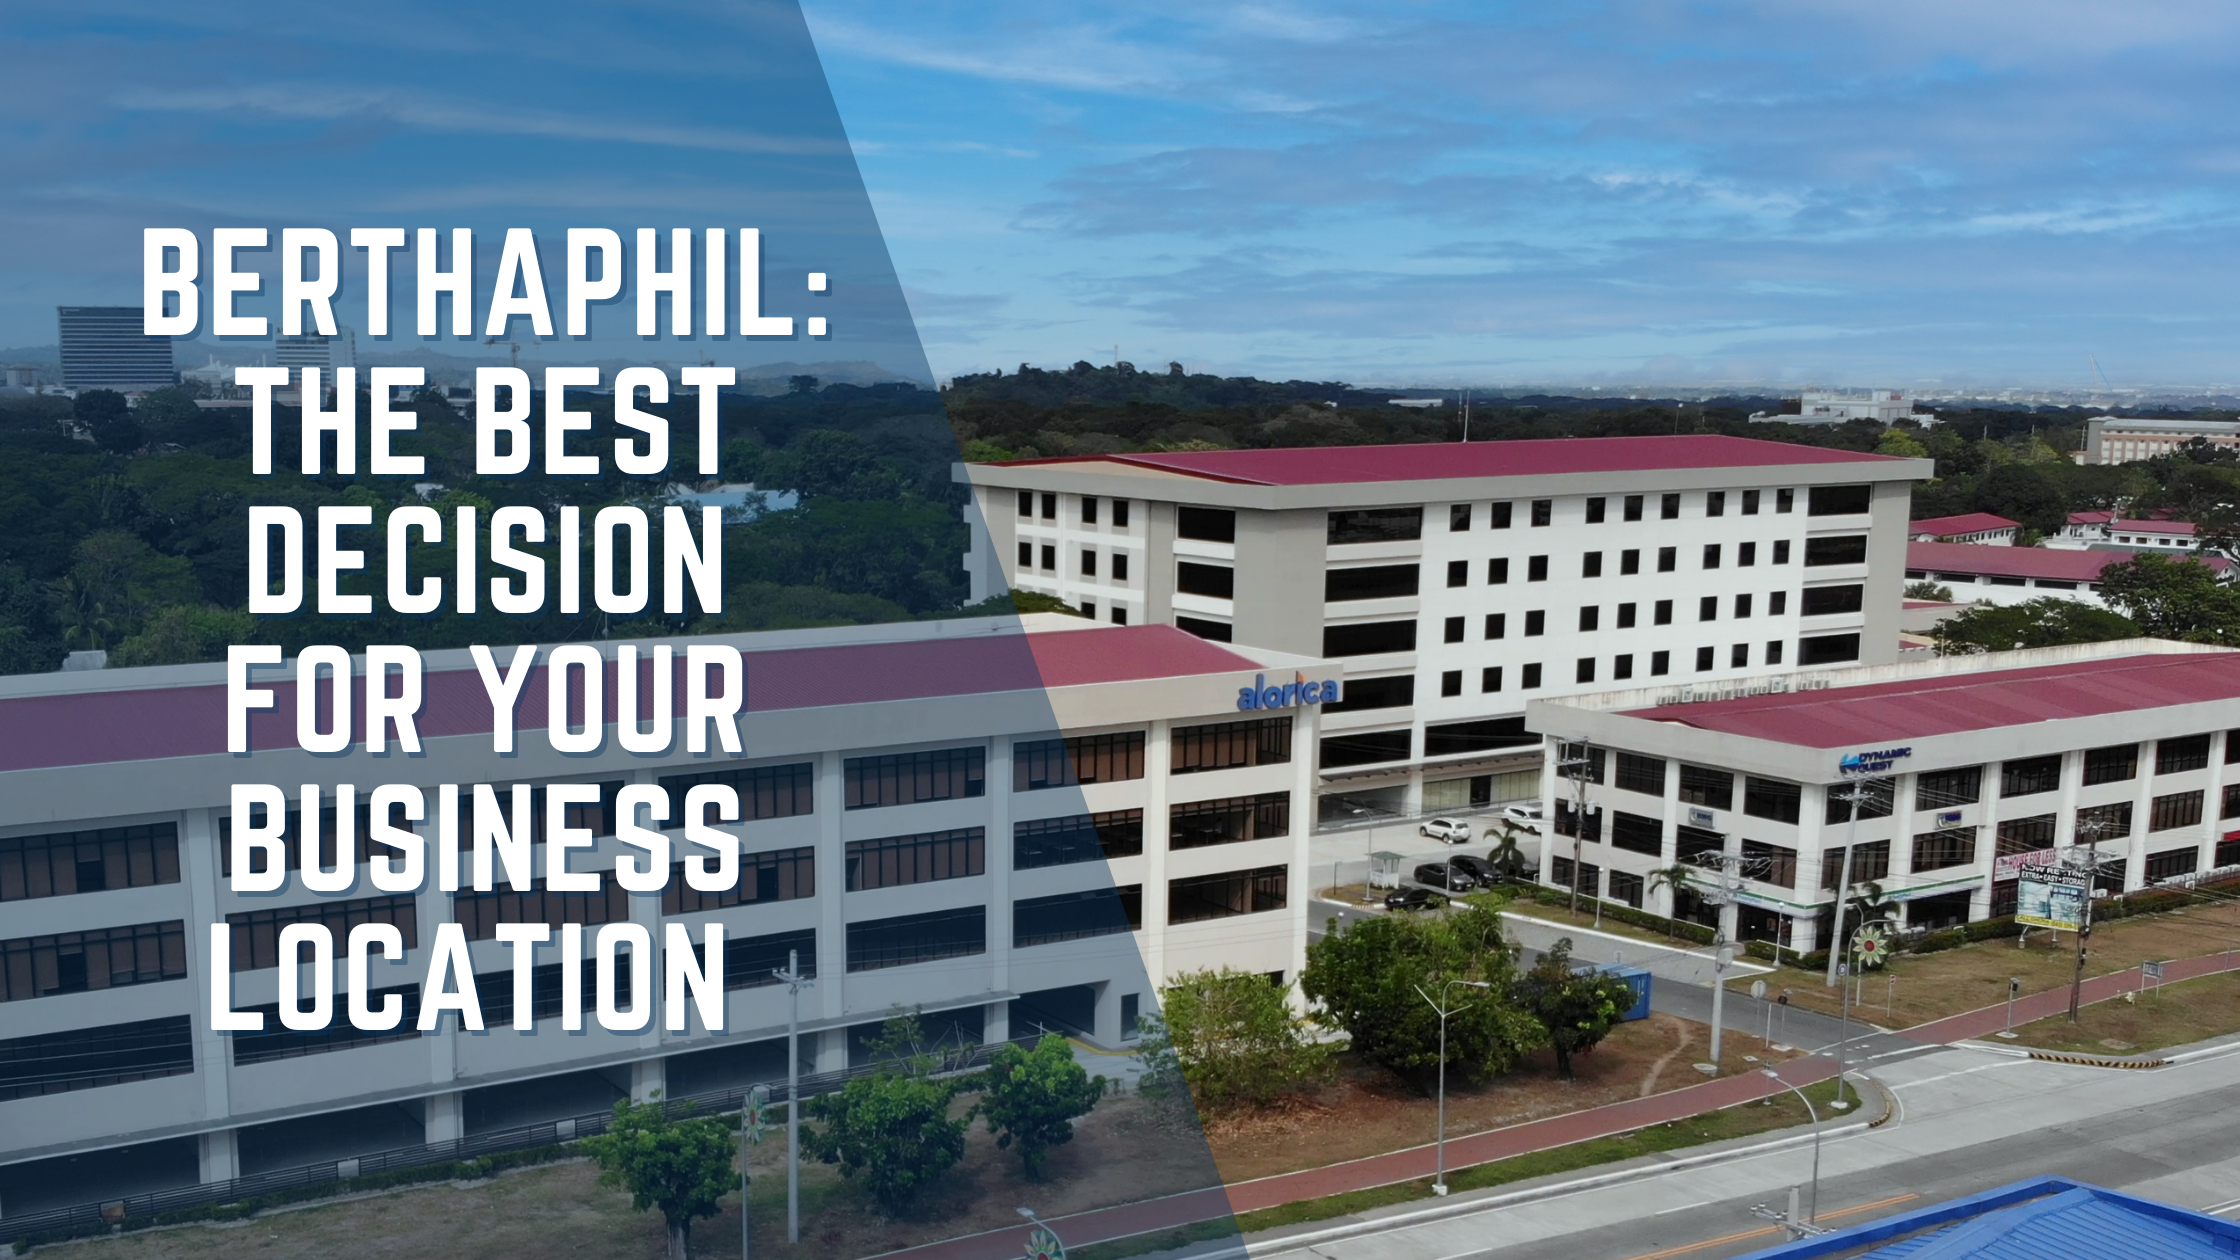 Berthaphil: The best decision for your business location 